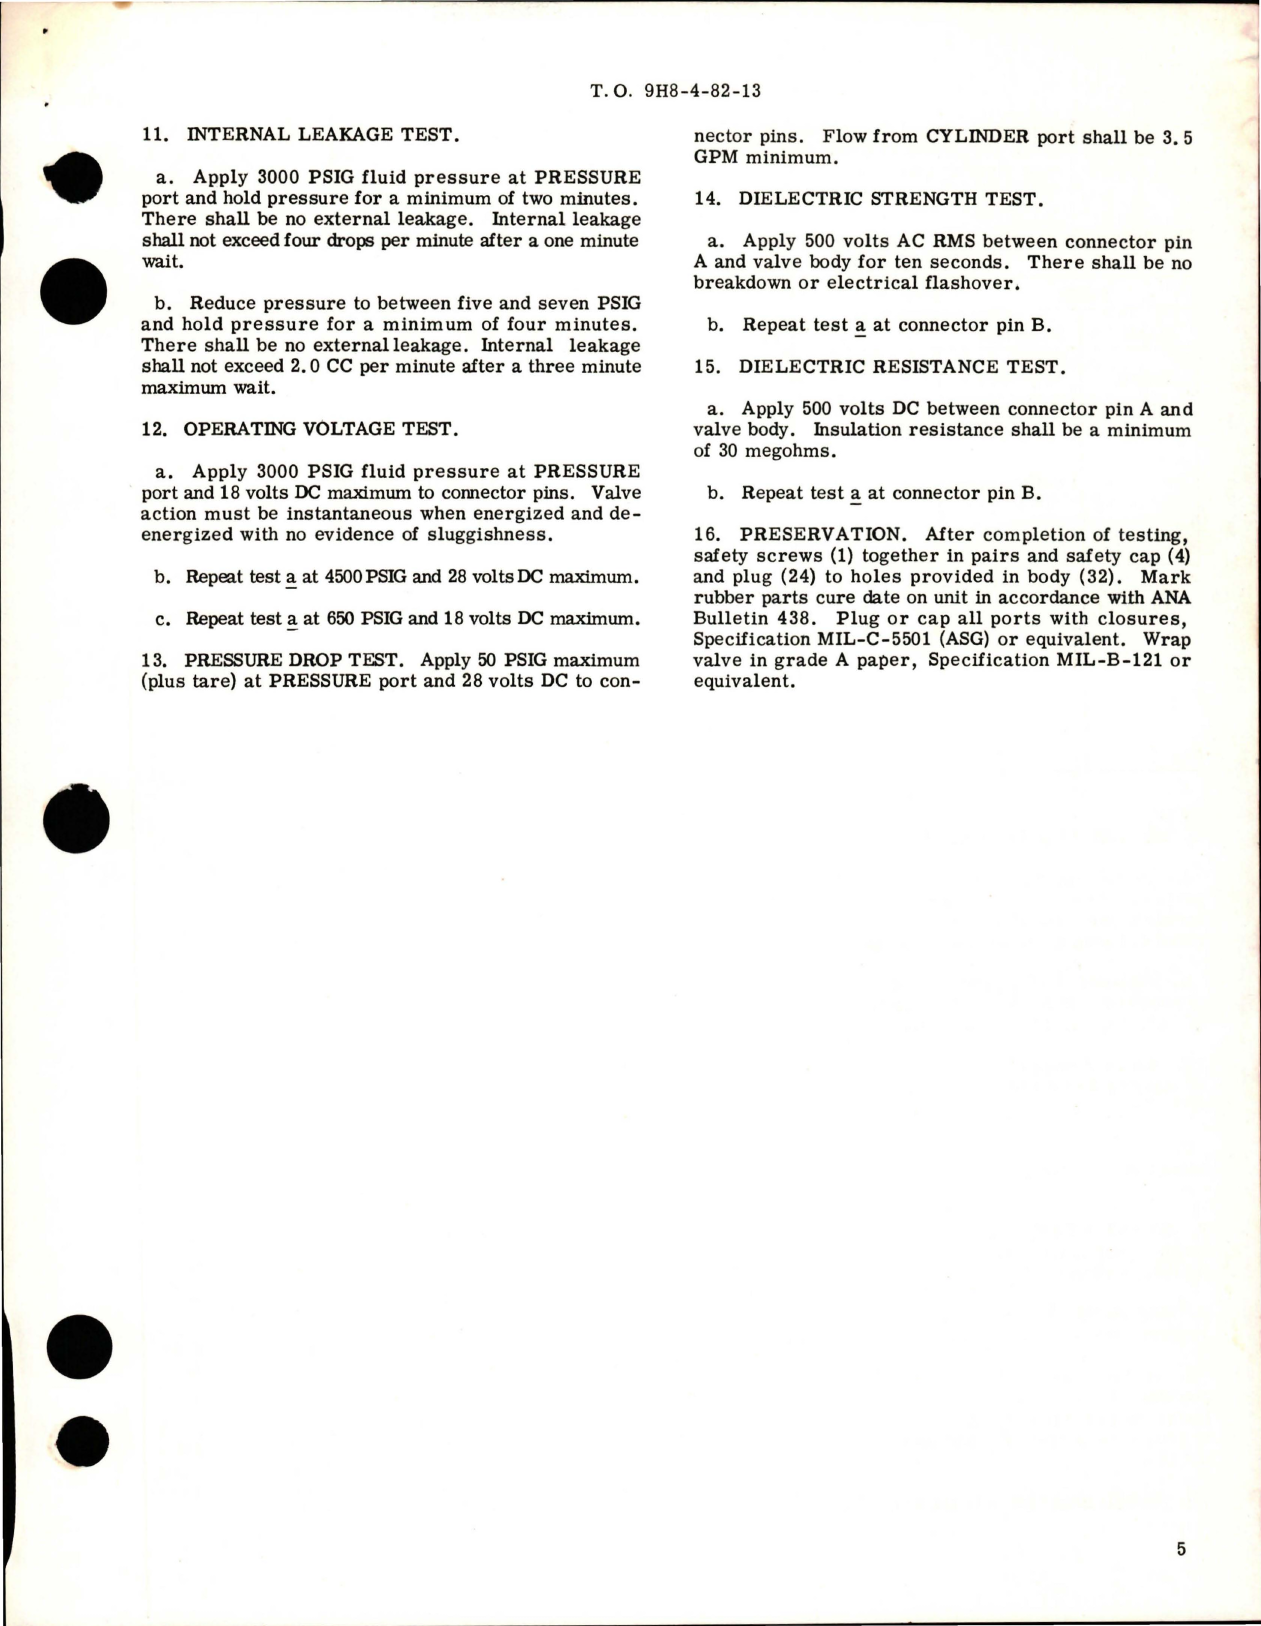 Sample page 5 from AirCorps Library document: Overhaul with Parts Breakdown for Solenoid Operated Shutoff Valve - Part 3-U-3068 